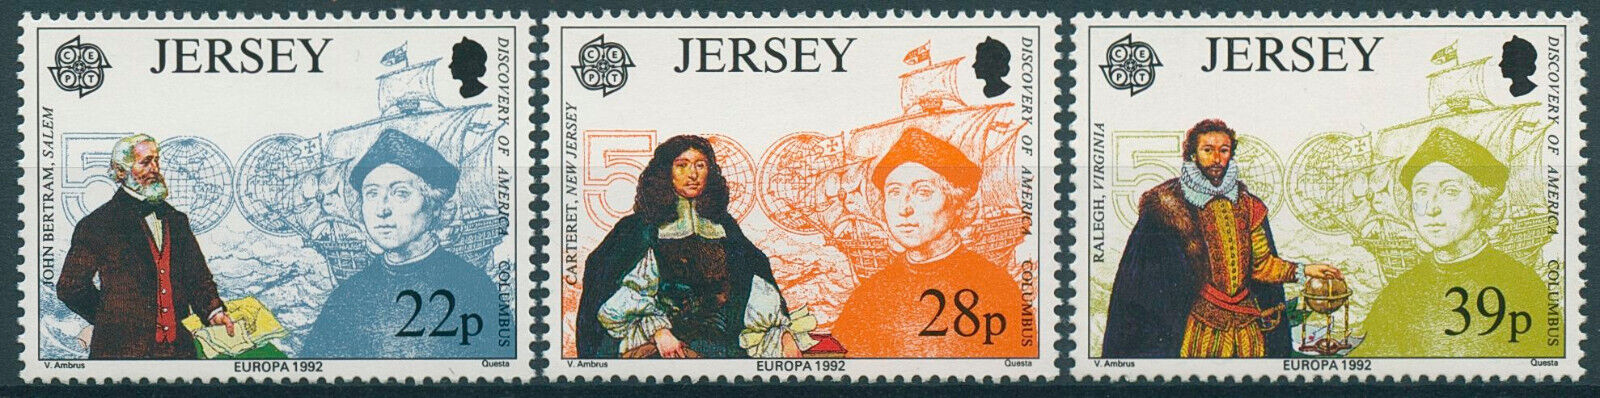 Jersey 1992 MNH Europa Stamps Discovery America Columbus Ships Explorers 3v Set